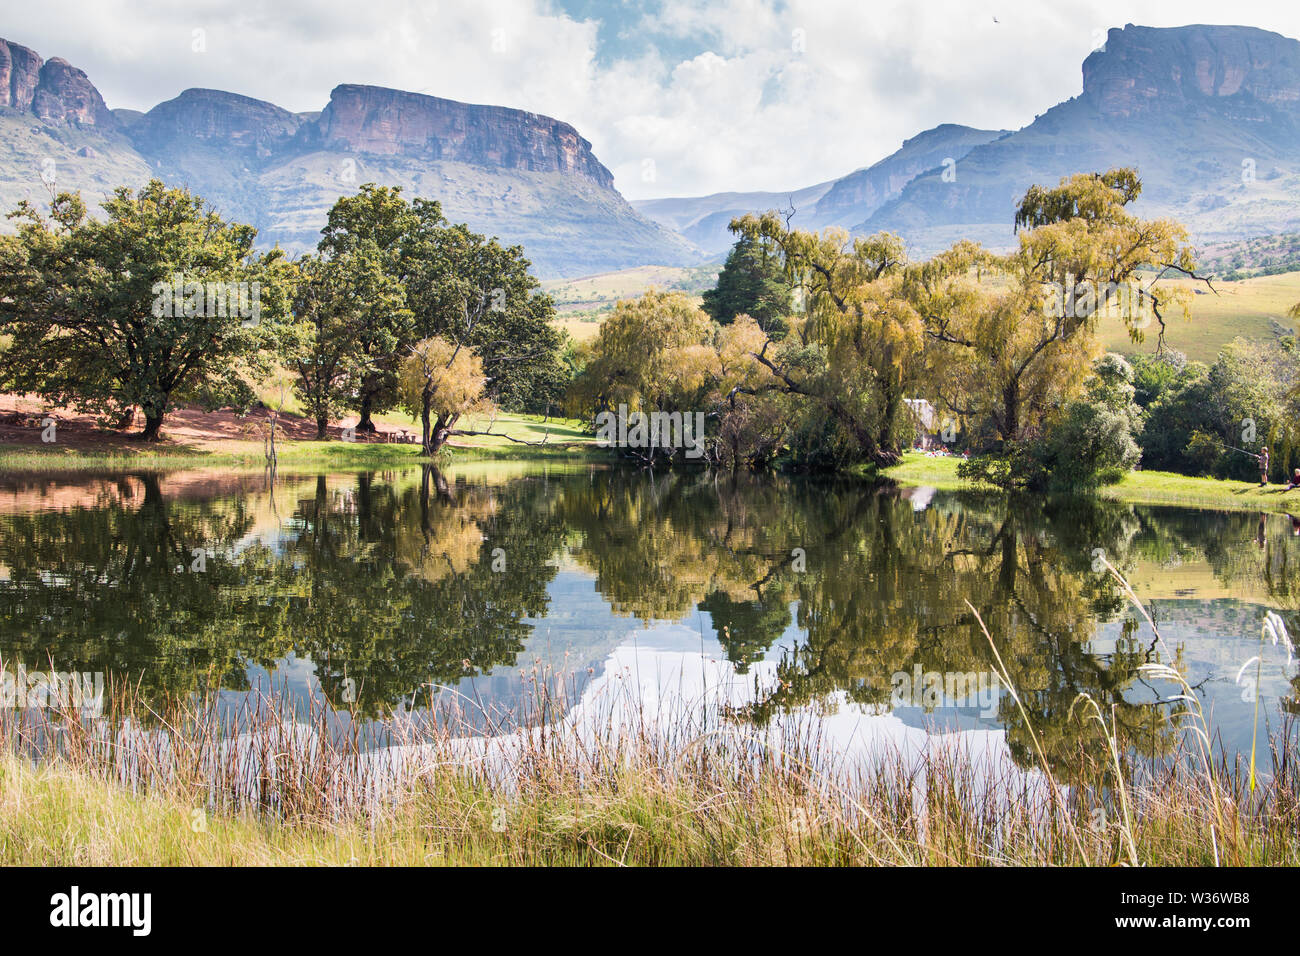 Northern Drakensberg mountains reflecting in water with trees and cloudy skies in the Royal Natal National Park, South Africa. Stock Photo